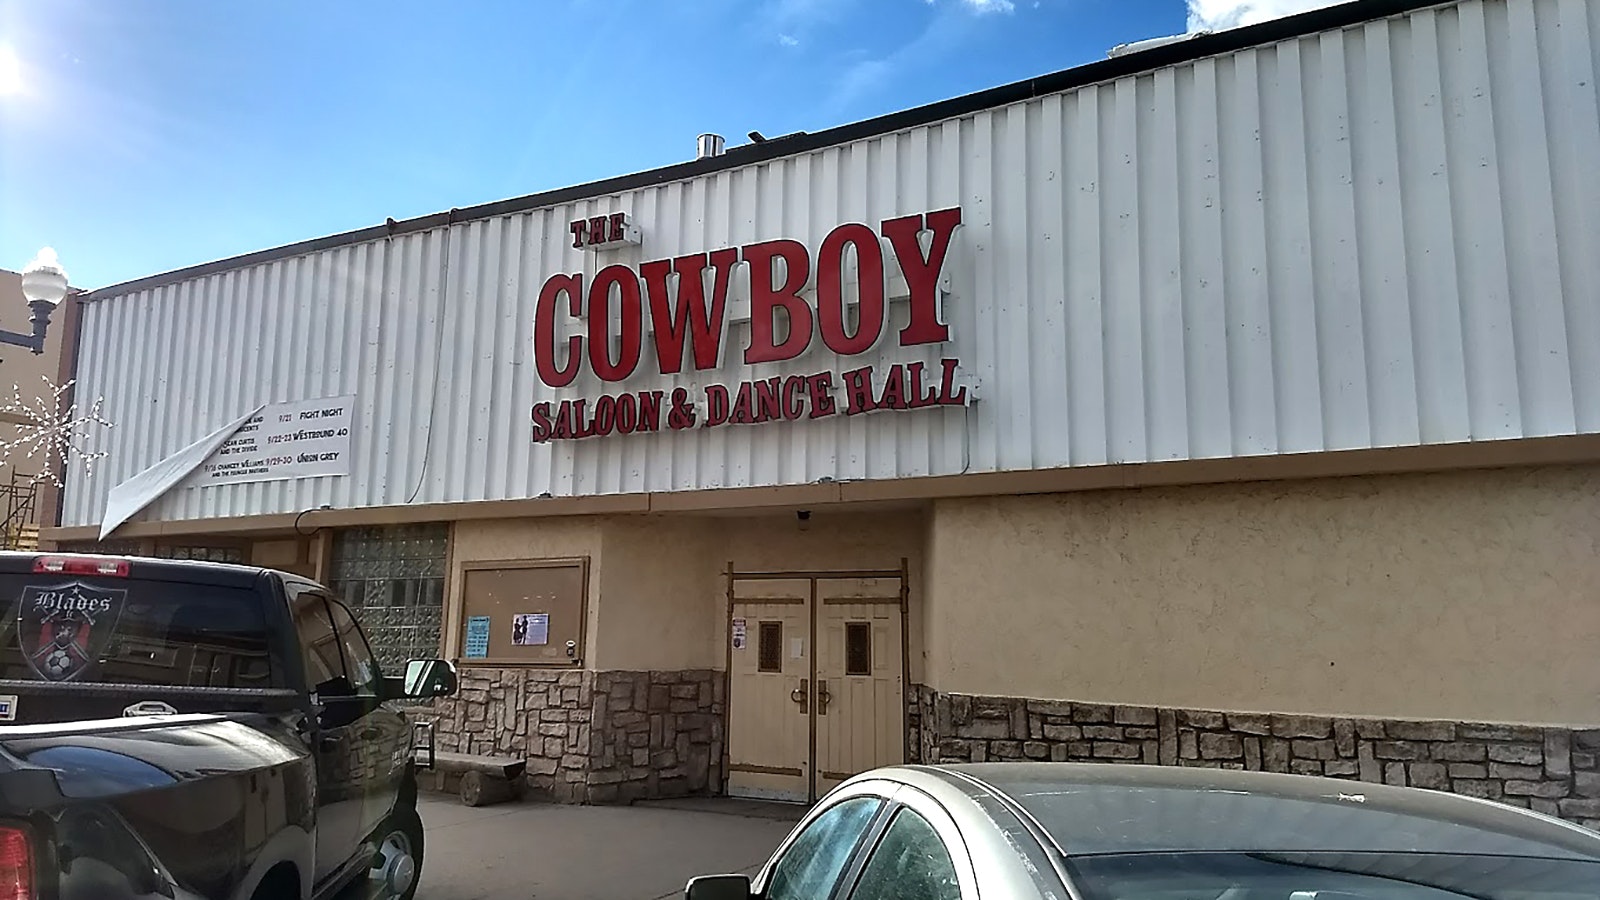 The Cowboy Saloon & Dance Hall in Laramie, Wyoming, which helped launch the career for country music star Chancey Williams. It's for sale, listing at $3.4 million.